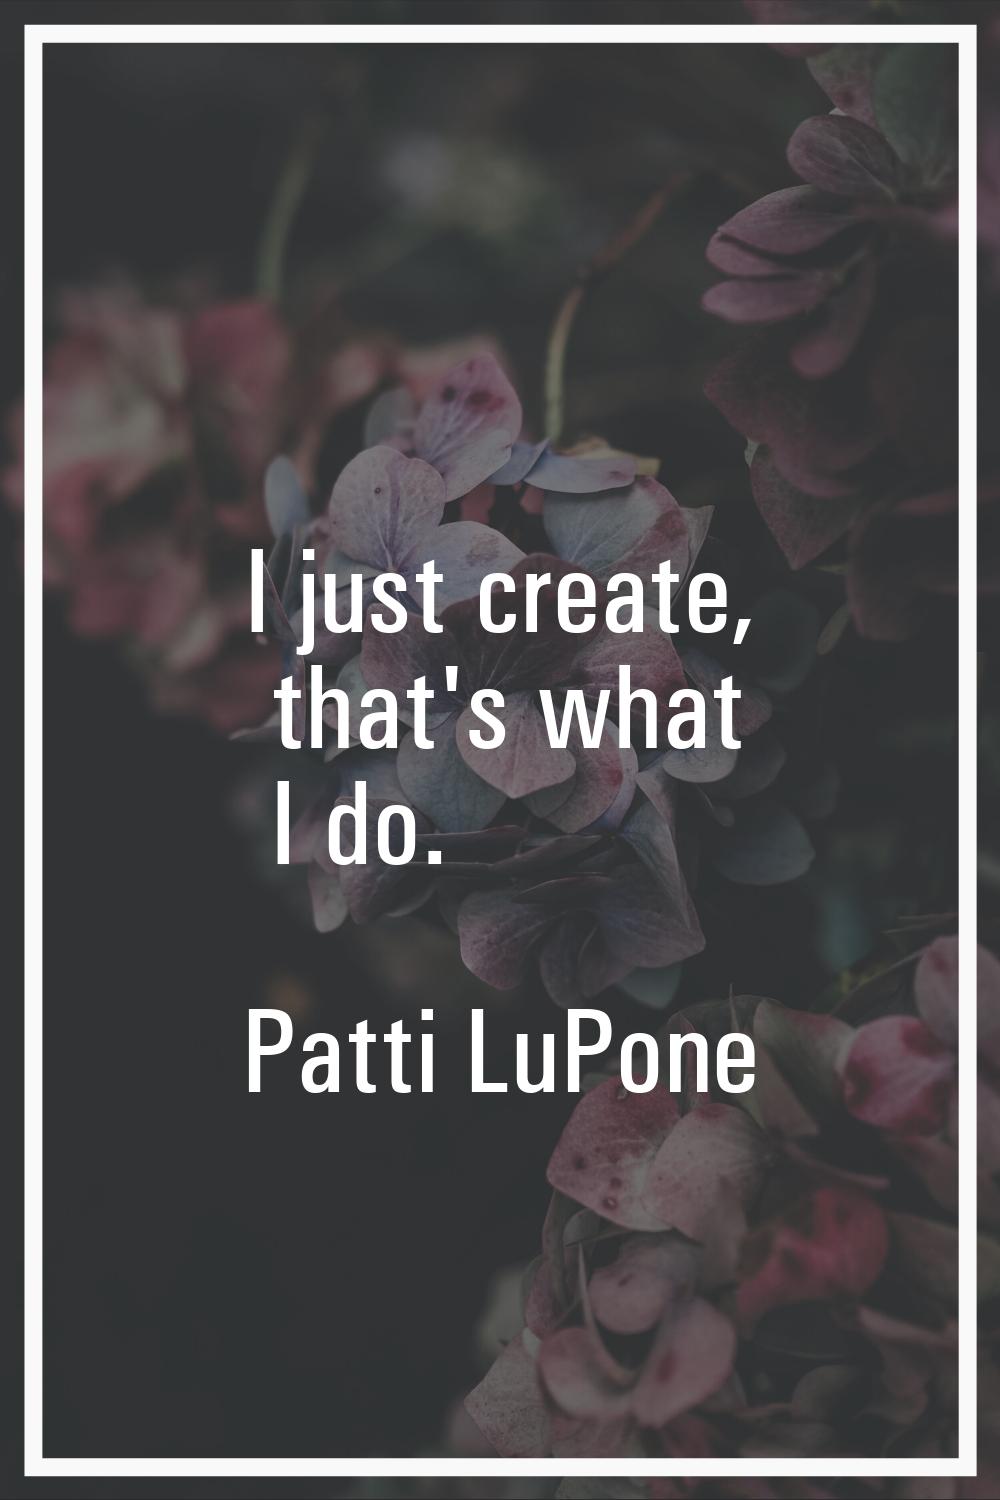 I just create, that's what I do.